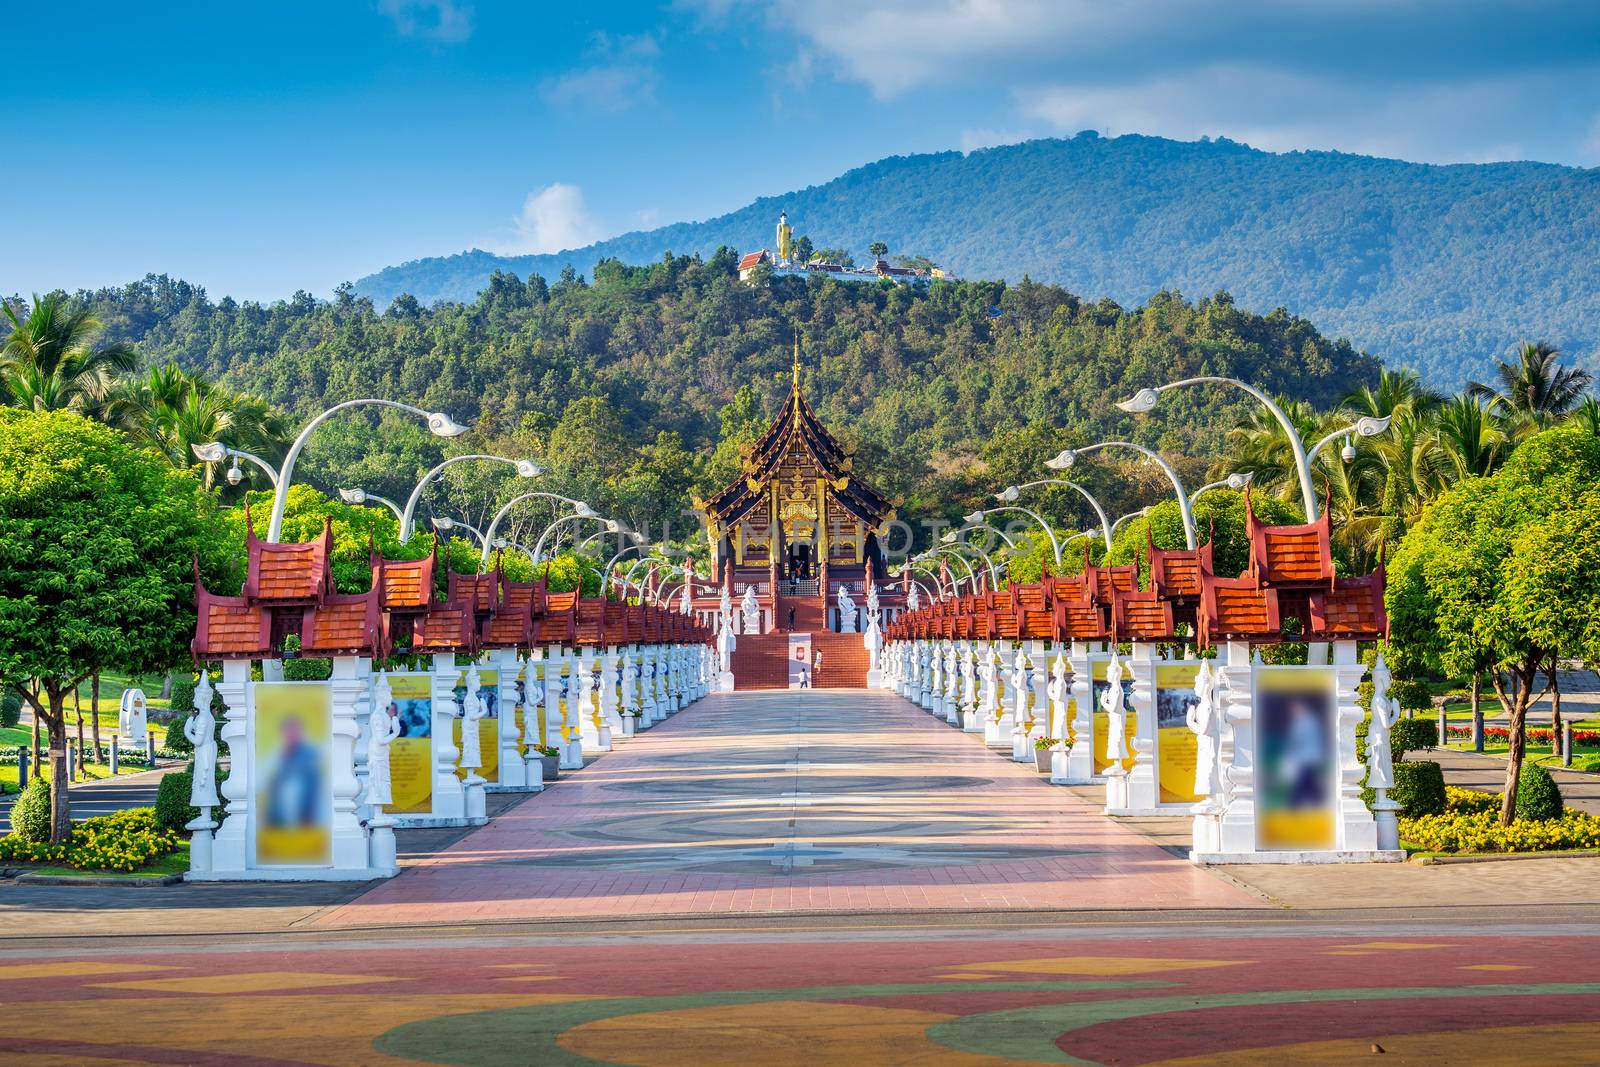 Ho kham luang northern thai style in Royal Flora ratchaphruek in Chiang Mai,Thailand. by gutarphotoghaphy